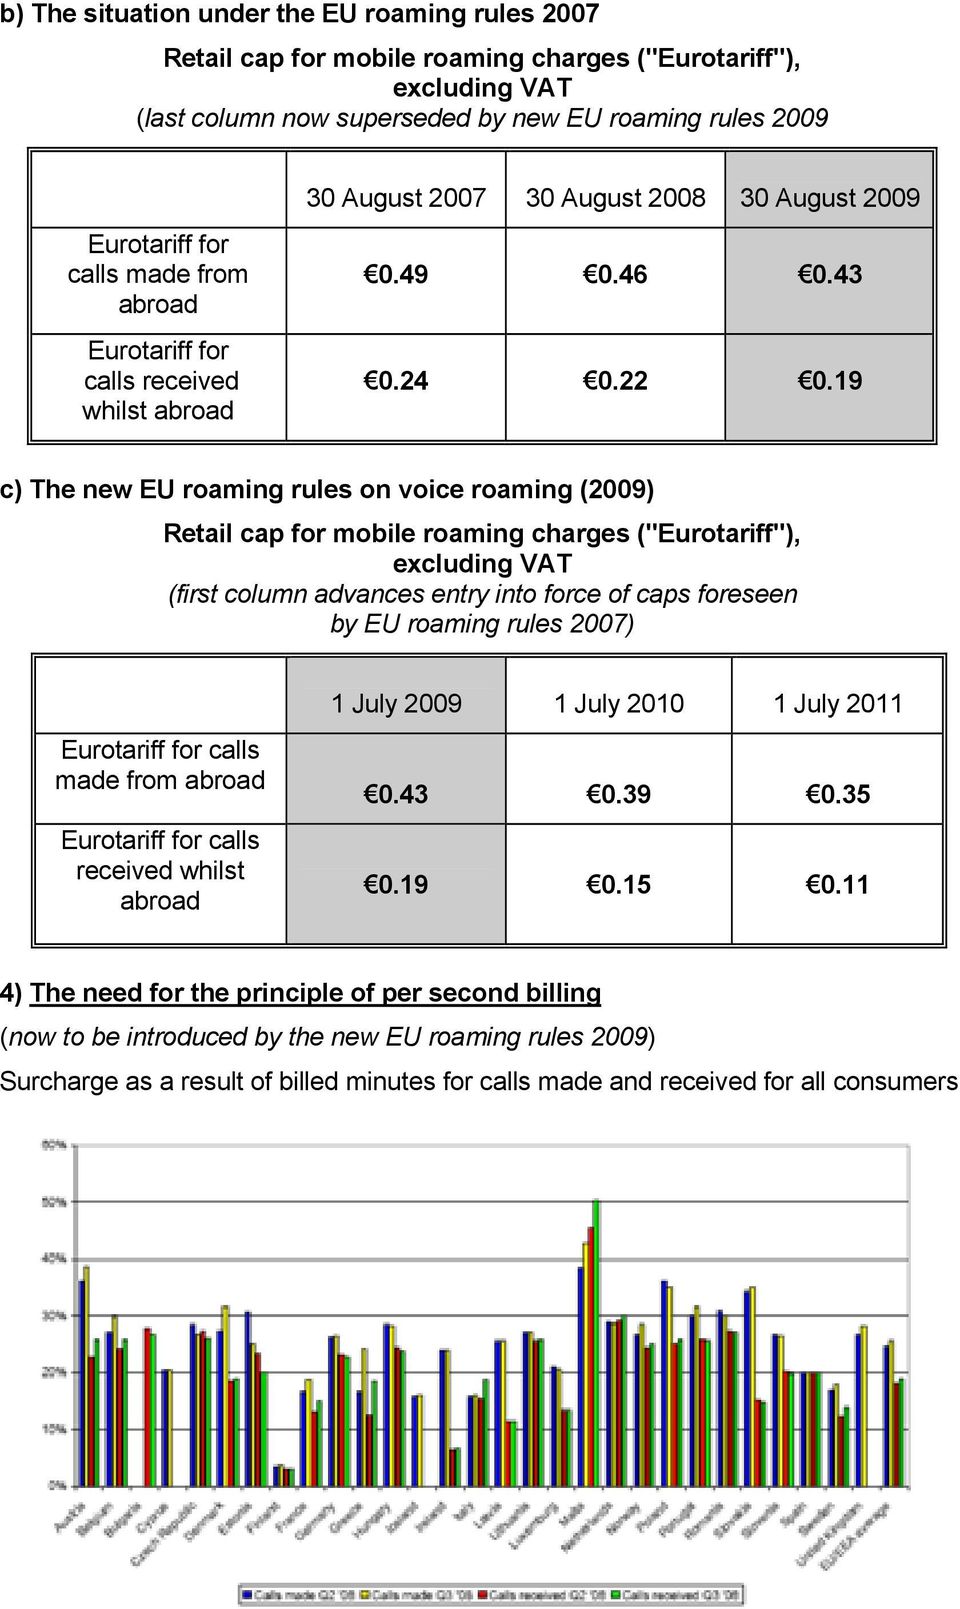 19 c) The new EU roaming rules on voice roaming (2009) Retail cap for mobile roaming charges ("Eurotariff"), excluding VAT (first column advances entry into force of caps foreseen by EU roaming rules